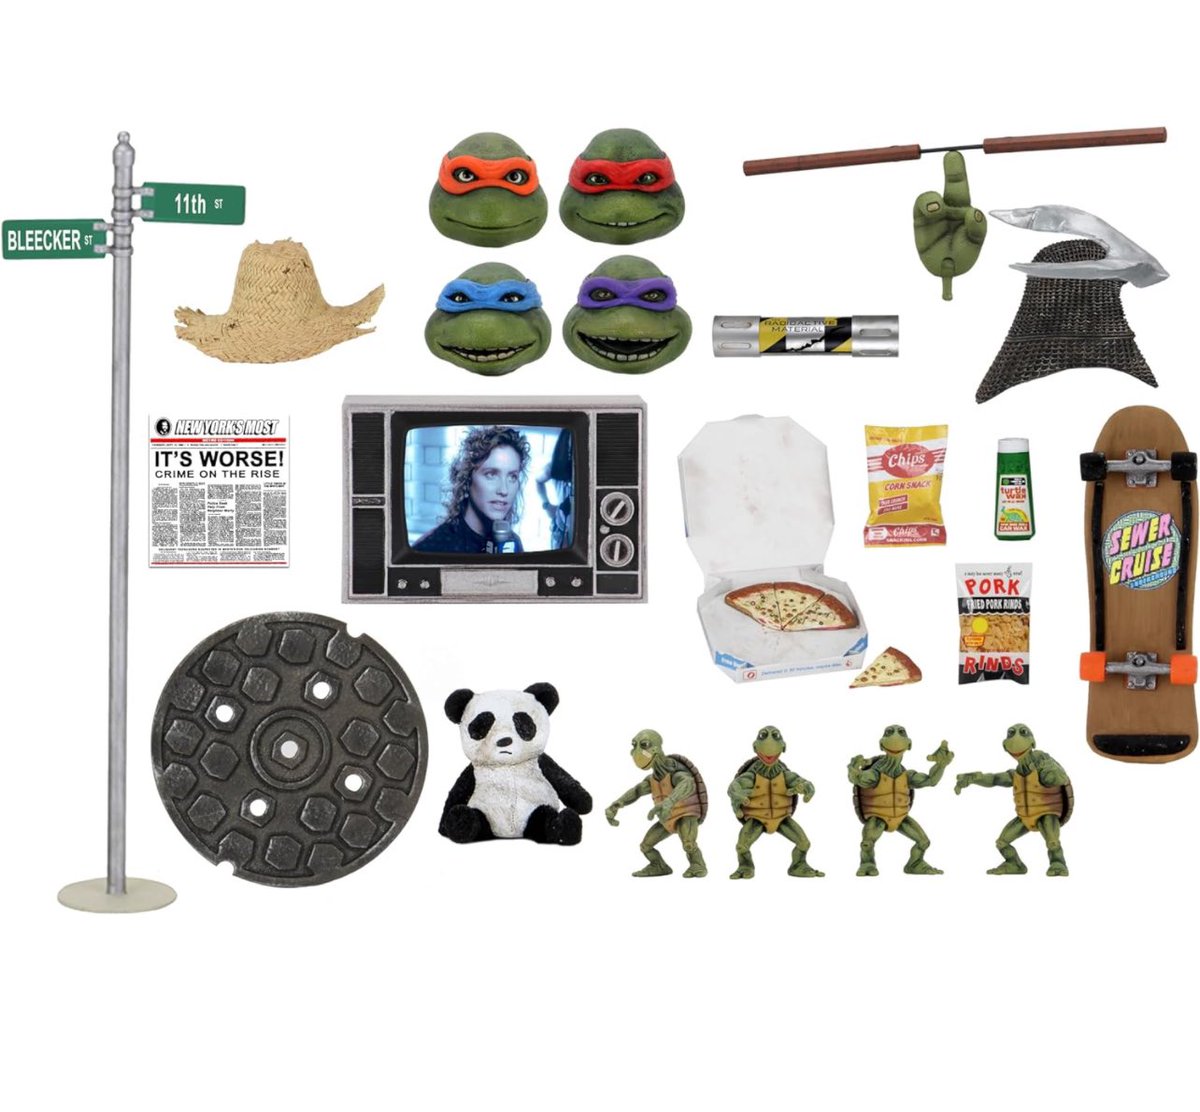 NECA TMNT Movie Accessory set is up at Amazon for preorder. 

amzn.to/4ajlVJN

#ad #neca #necatmnt #necatoys #necaofficial #tmnt #teenagemutantninjaturtles #ninjaturtles #actionfigures #actionfigure #toynews #toycollector #toycommunity #inpursuitoftoys